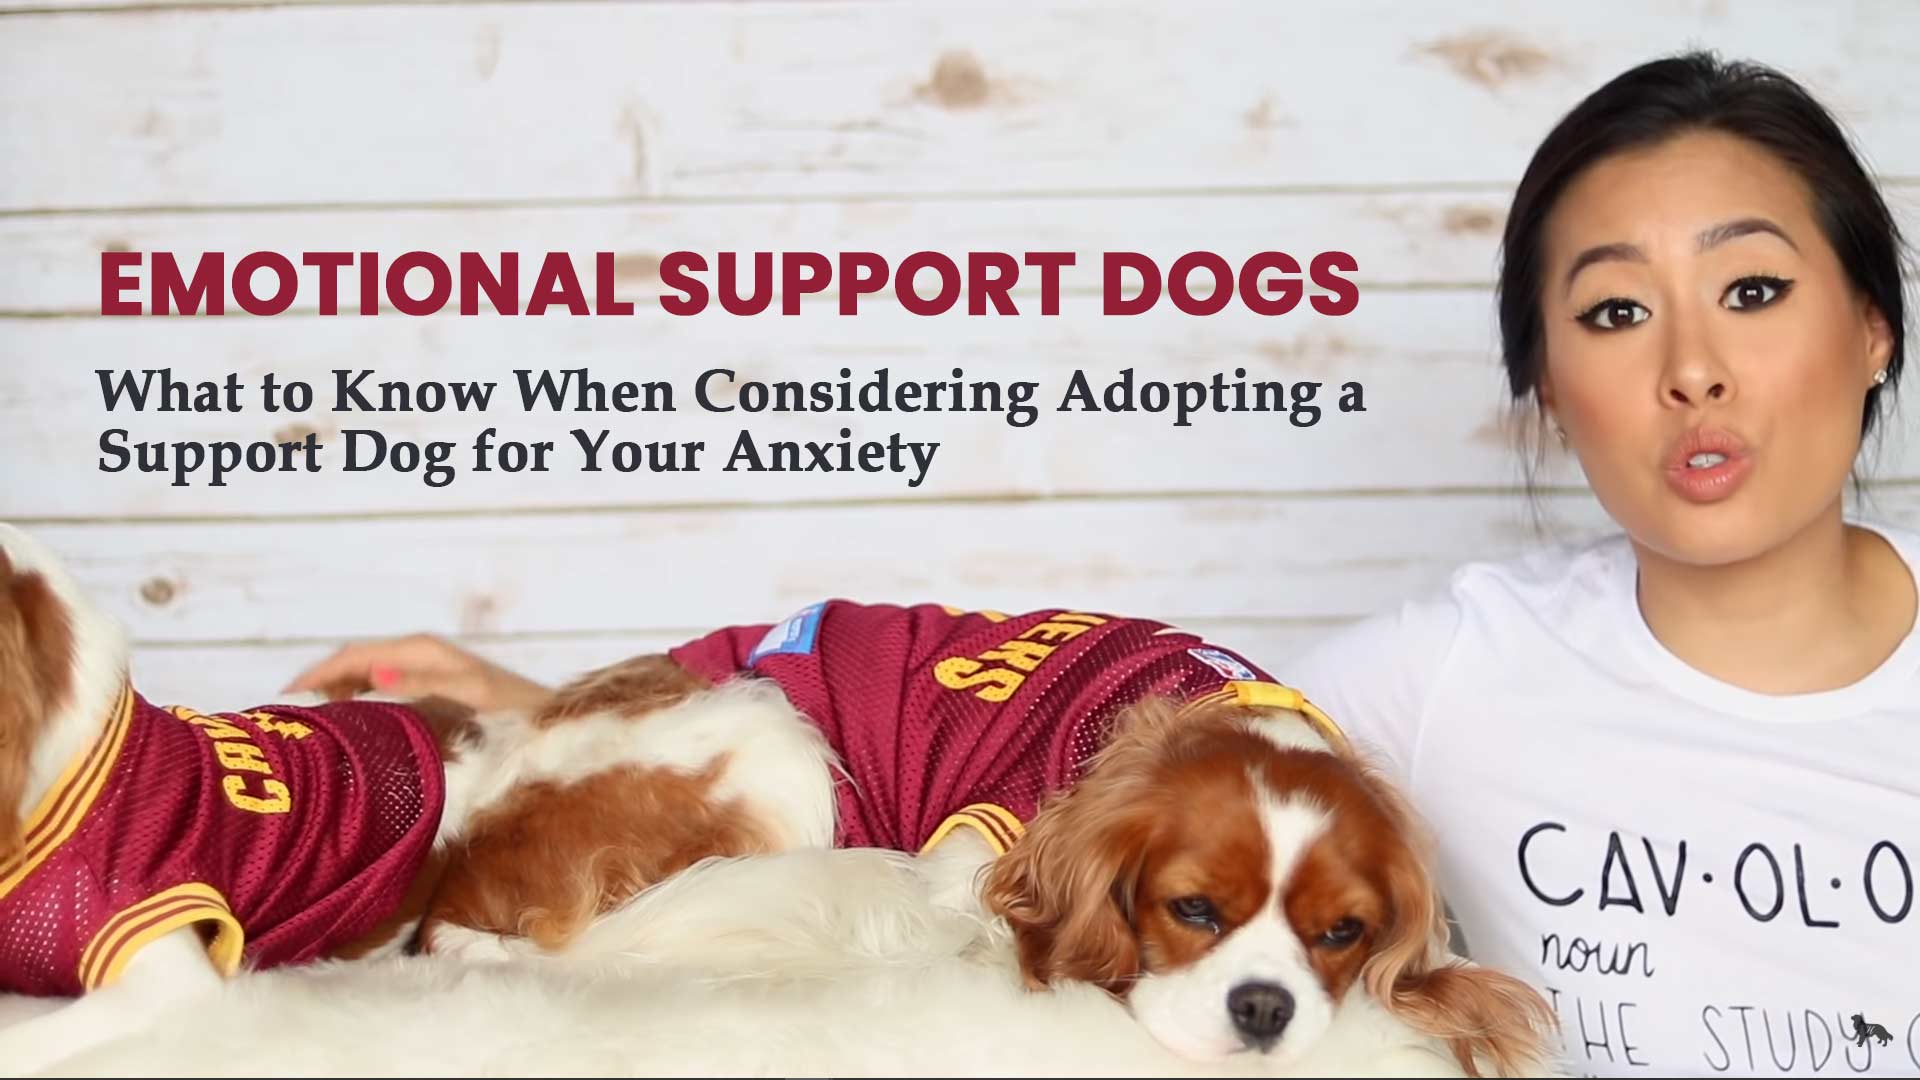 EMOTIONAL SUPPORT DOGS